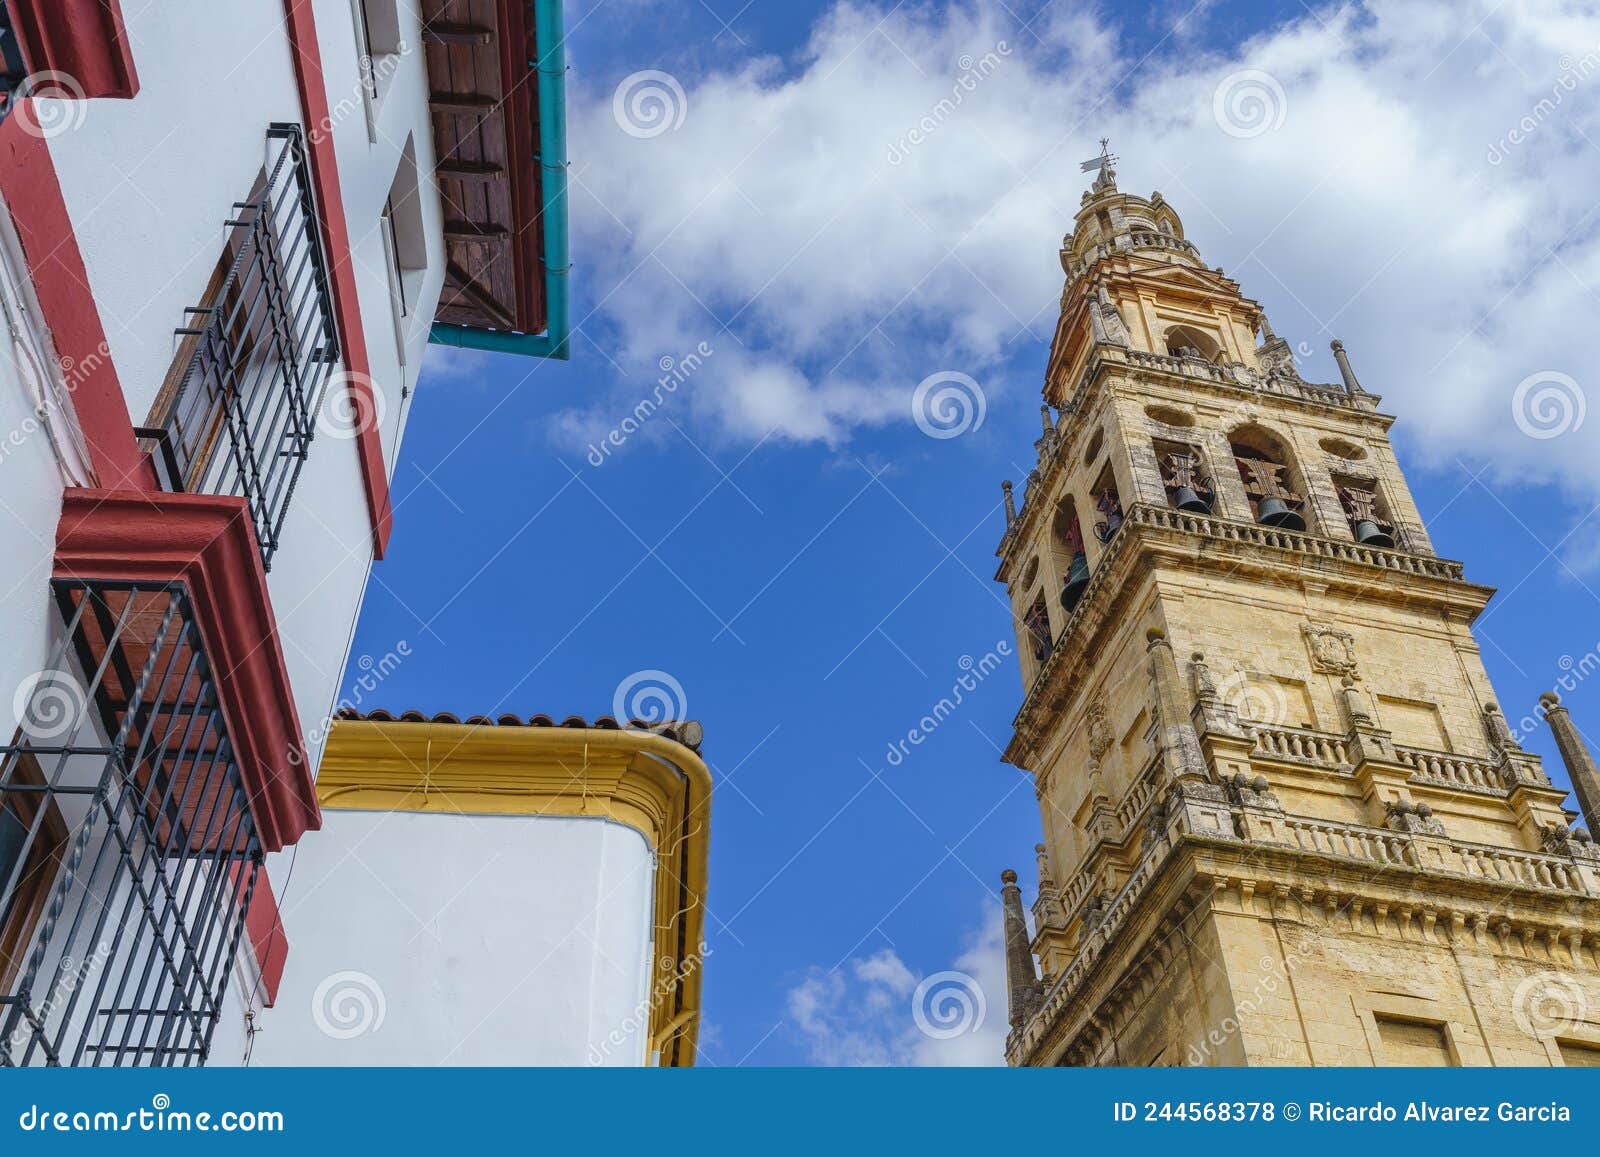 view of the mosque-cathedral of cordoba, in andalucia, spain